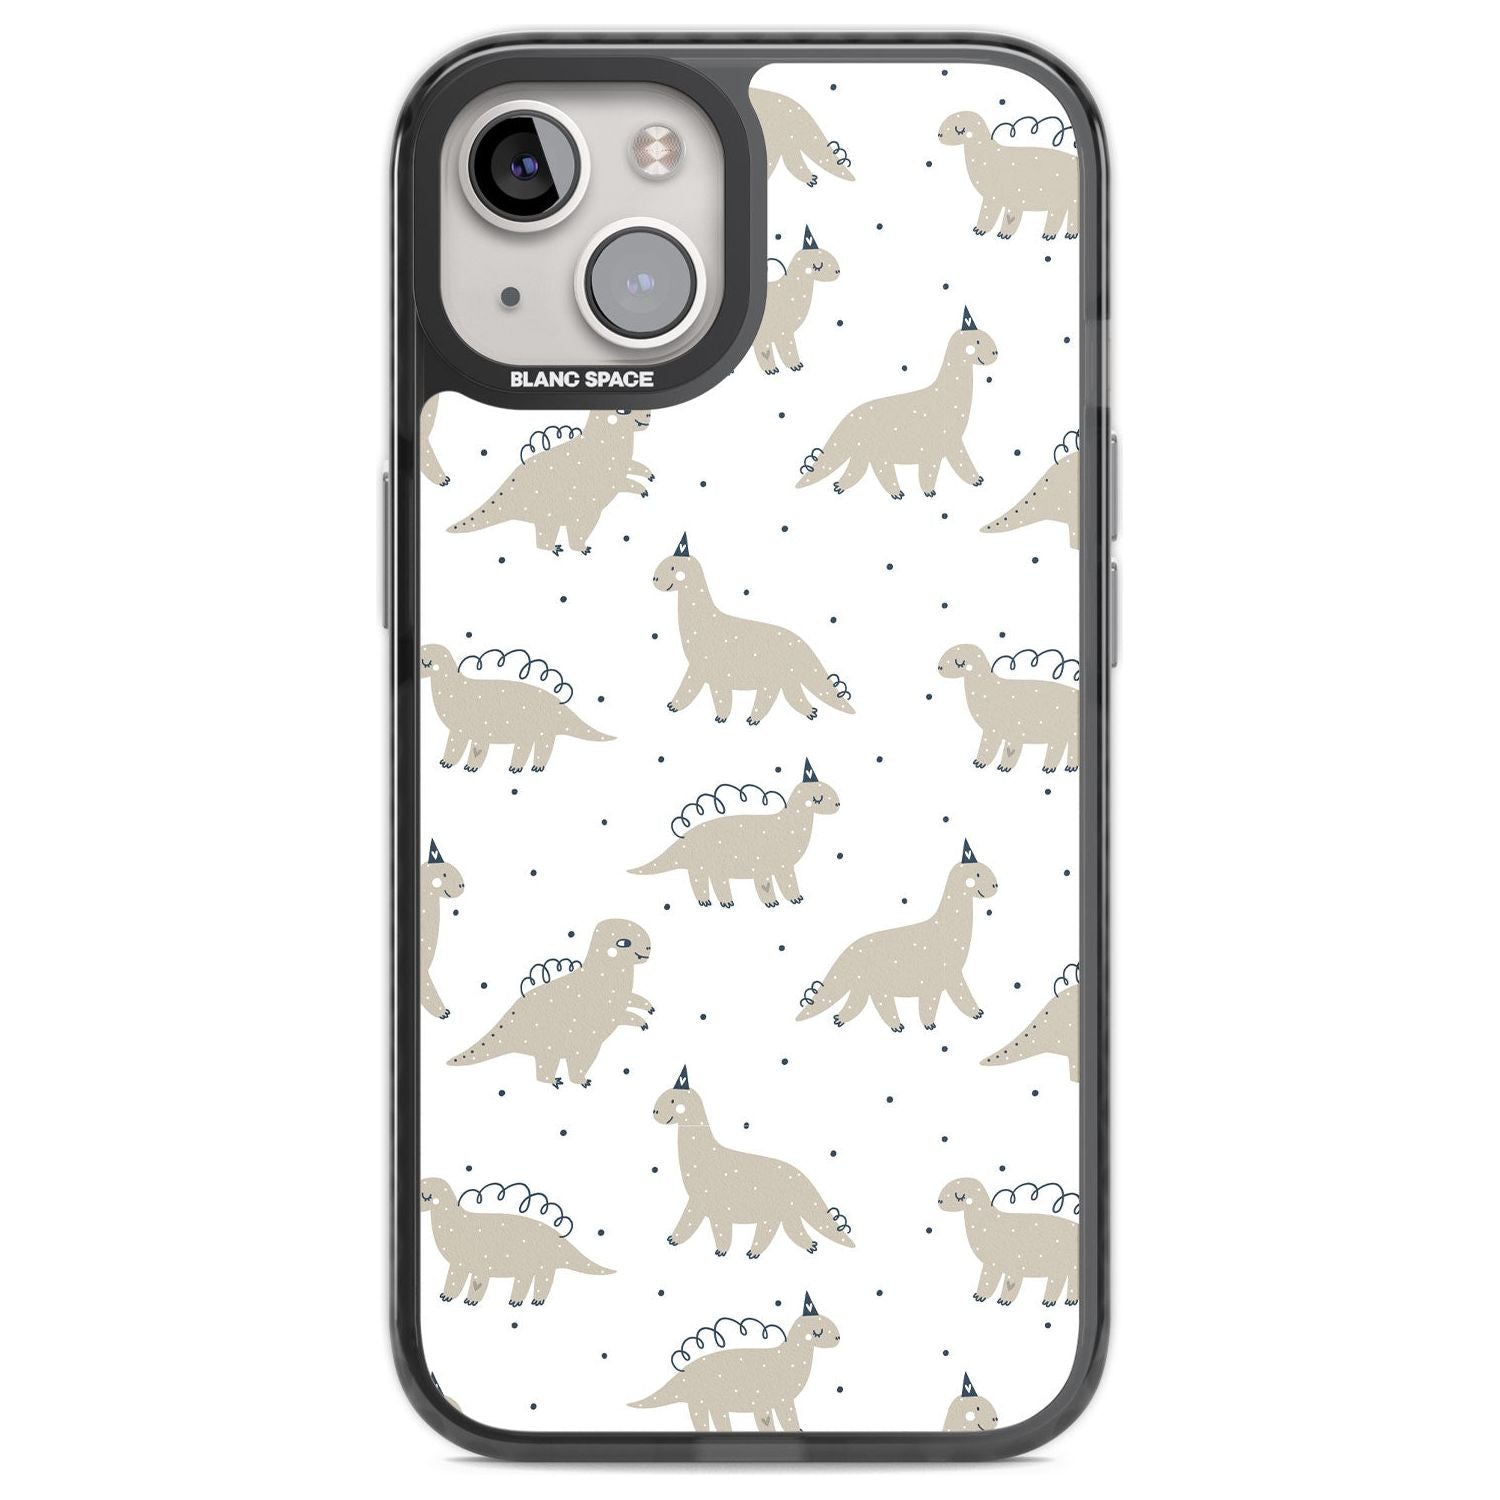 Adorable Dinosaurs Pattern Phone Case iPhone 12 / Black Impact Case,iPhone 13 / Black Impact Case,iPhone 12 Pro / Black Impact Case,iPhone 14 / Black Impact Case,iPhone 15 Plus / Black Impact Case,iPhone 15 / Black Impact Case Blanc Space